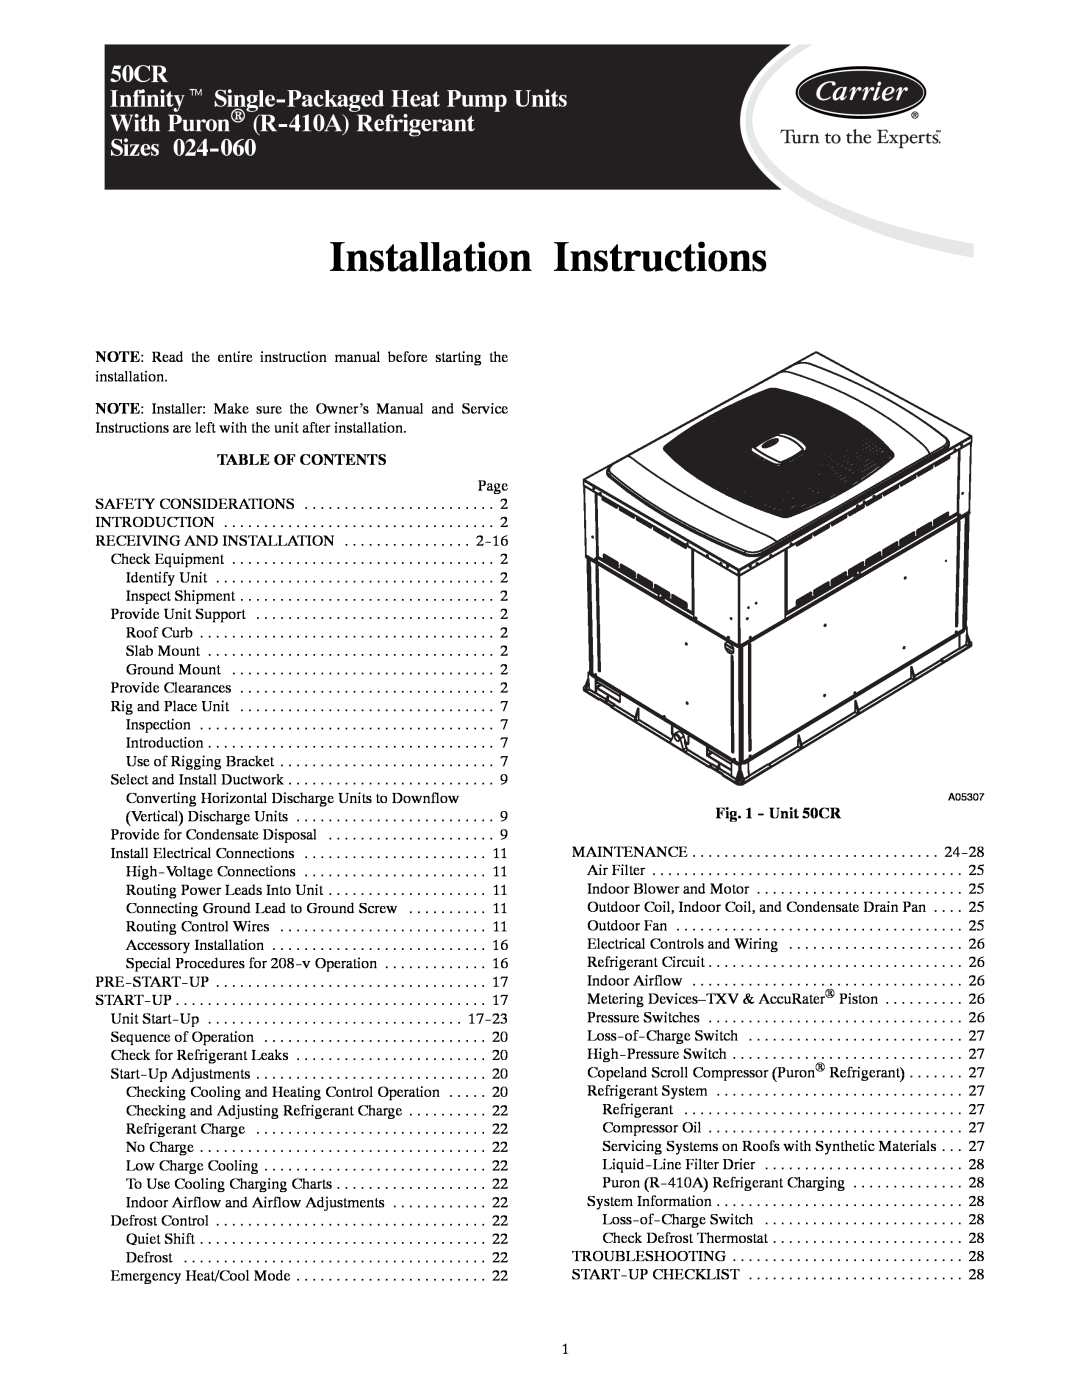 Carrier installation instructions Installation Instructions, Sizes, Table Of Contents, Unit 50CR 